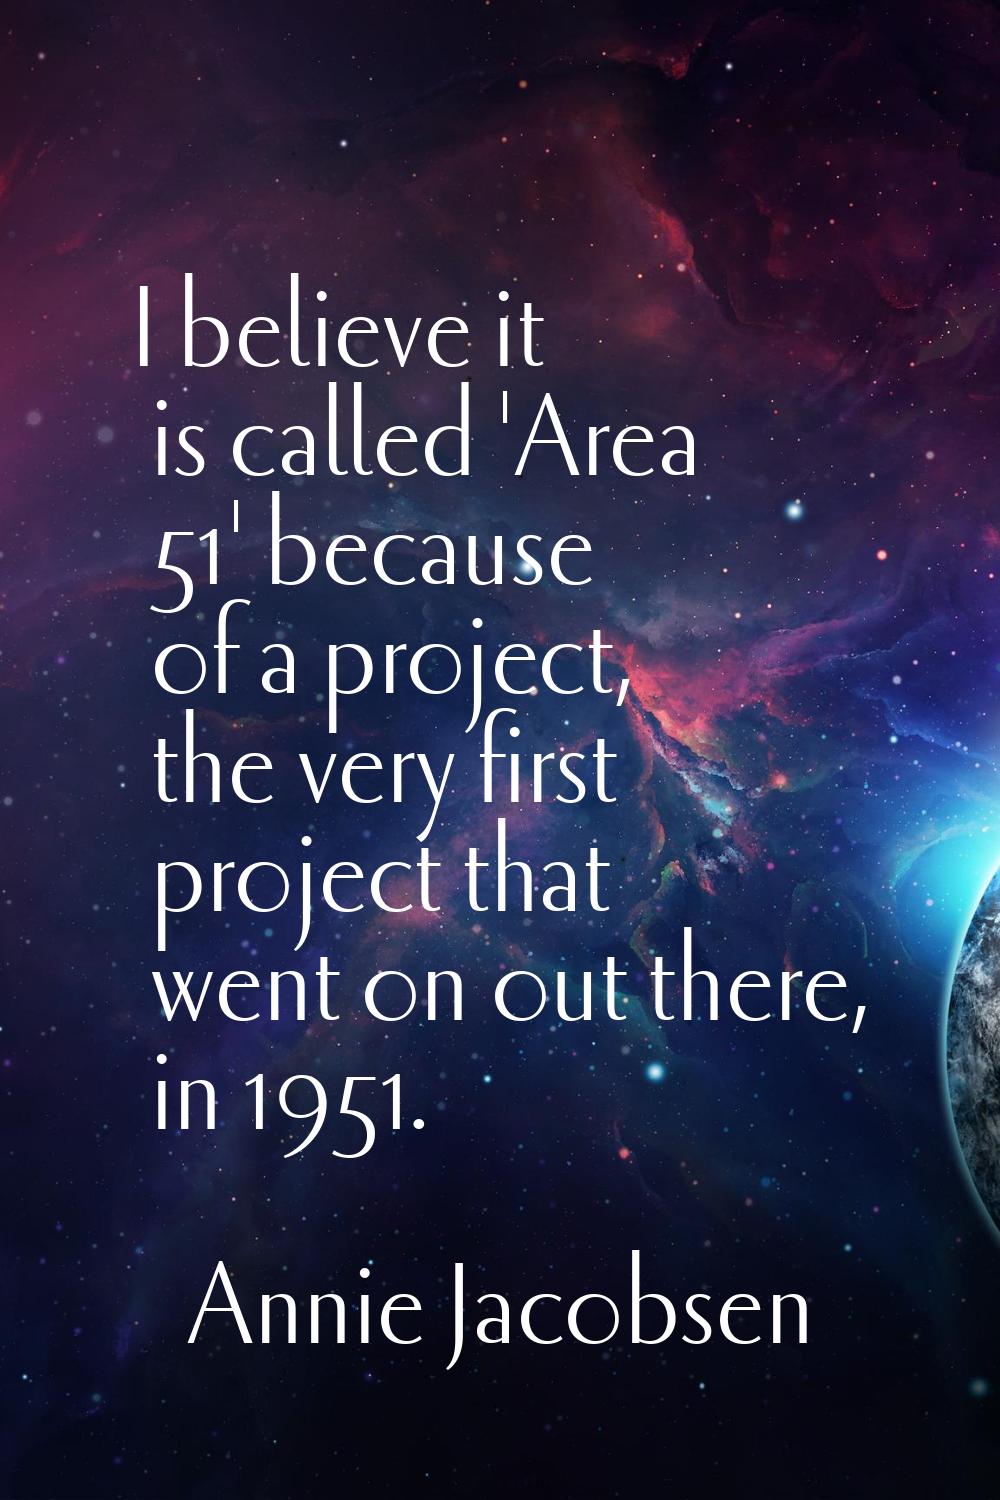 I believe it is called 'Area 51' because of a project, the very first project that went on out ther